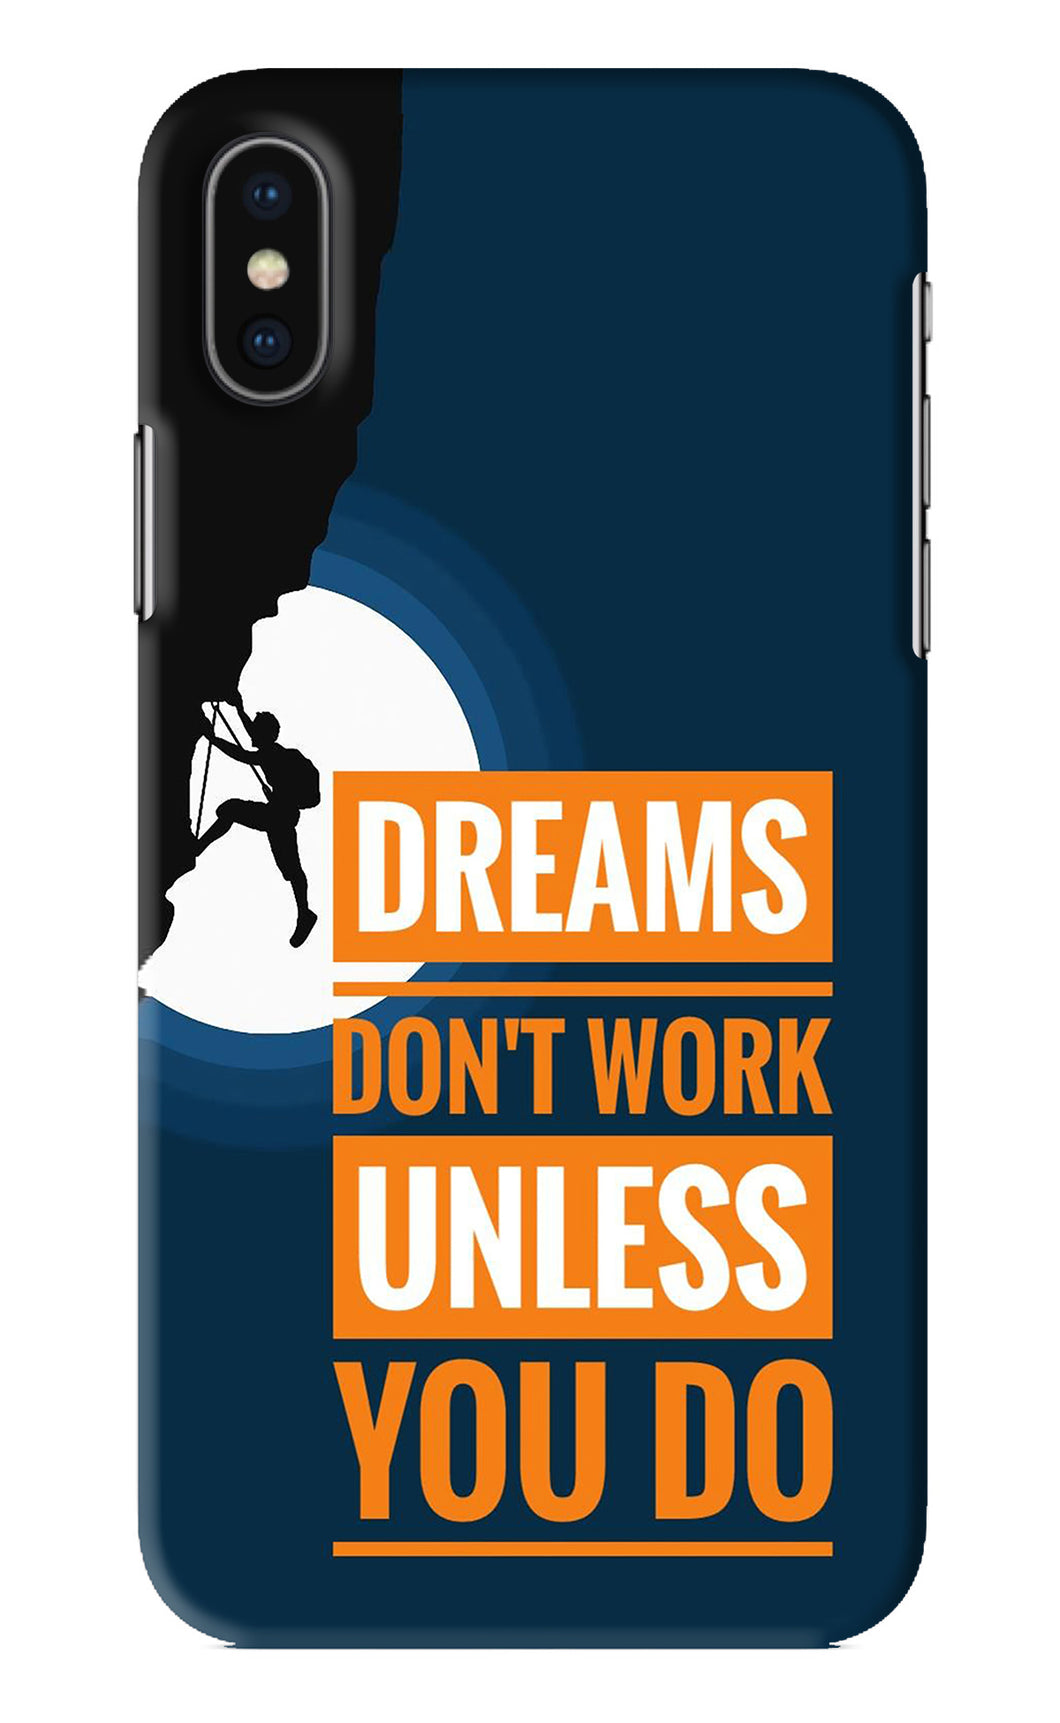 Dreams Don’T Work Unless You Do iPhone X Back Skin Wrap